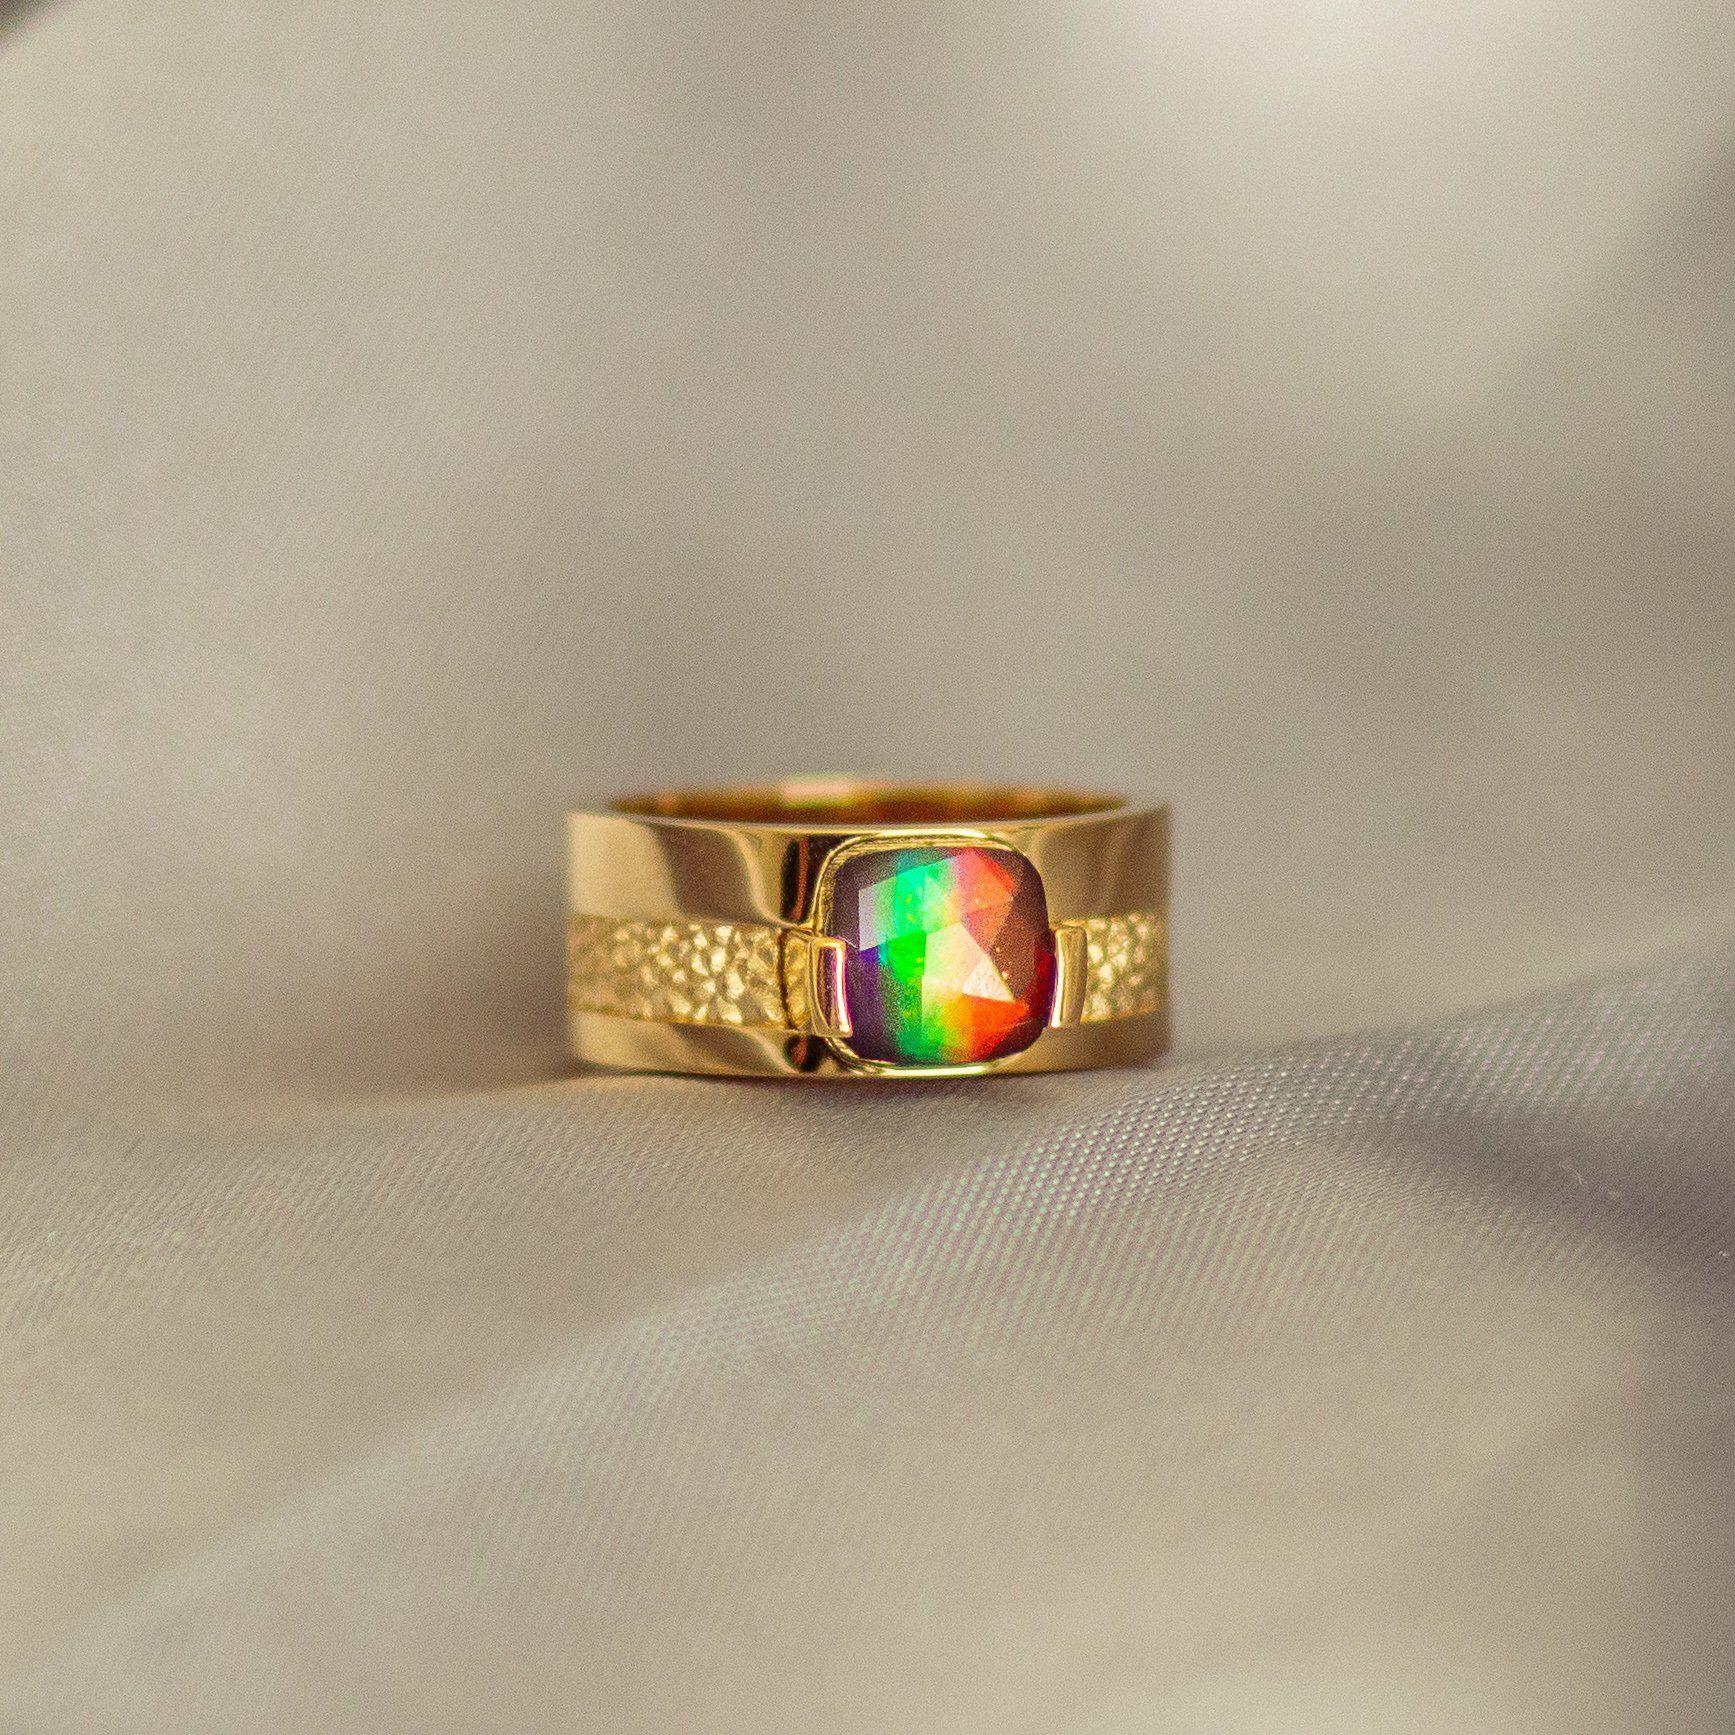 Martha Seely designed, AA grade 8mm x 8mm cushion Ammolite set in 14K Yellow gold.

Since 1979, KORITE has been the home of superior Ammolite, inspiring the world with the rarity and beauty of Canada’s gemstone. KORITE Ammolite is as unique as you